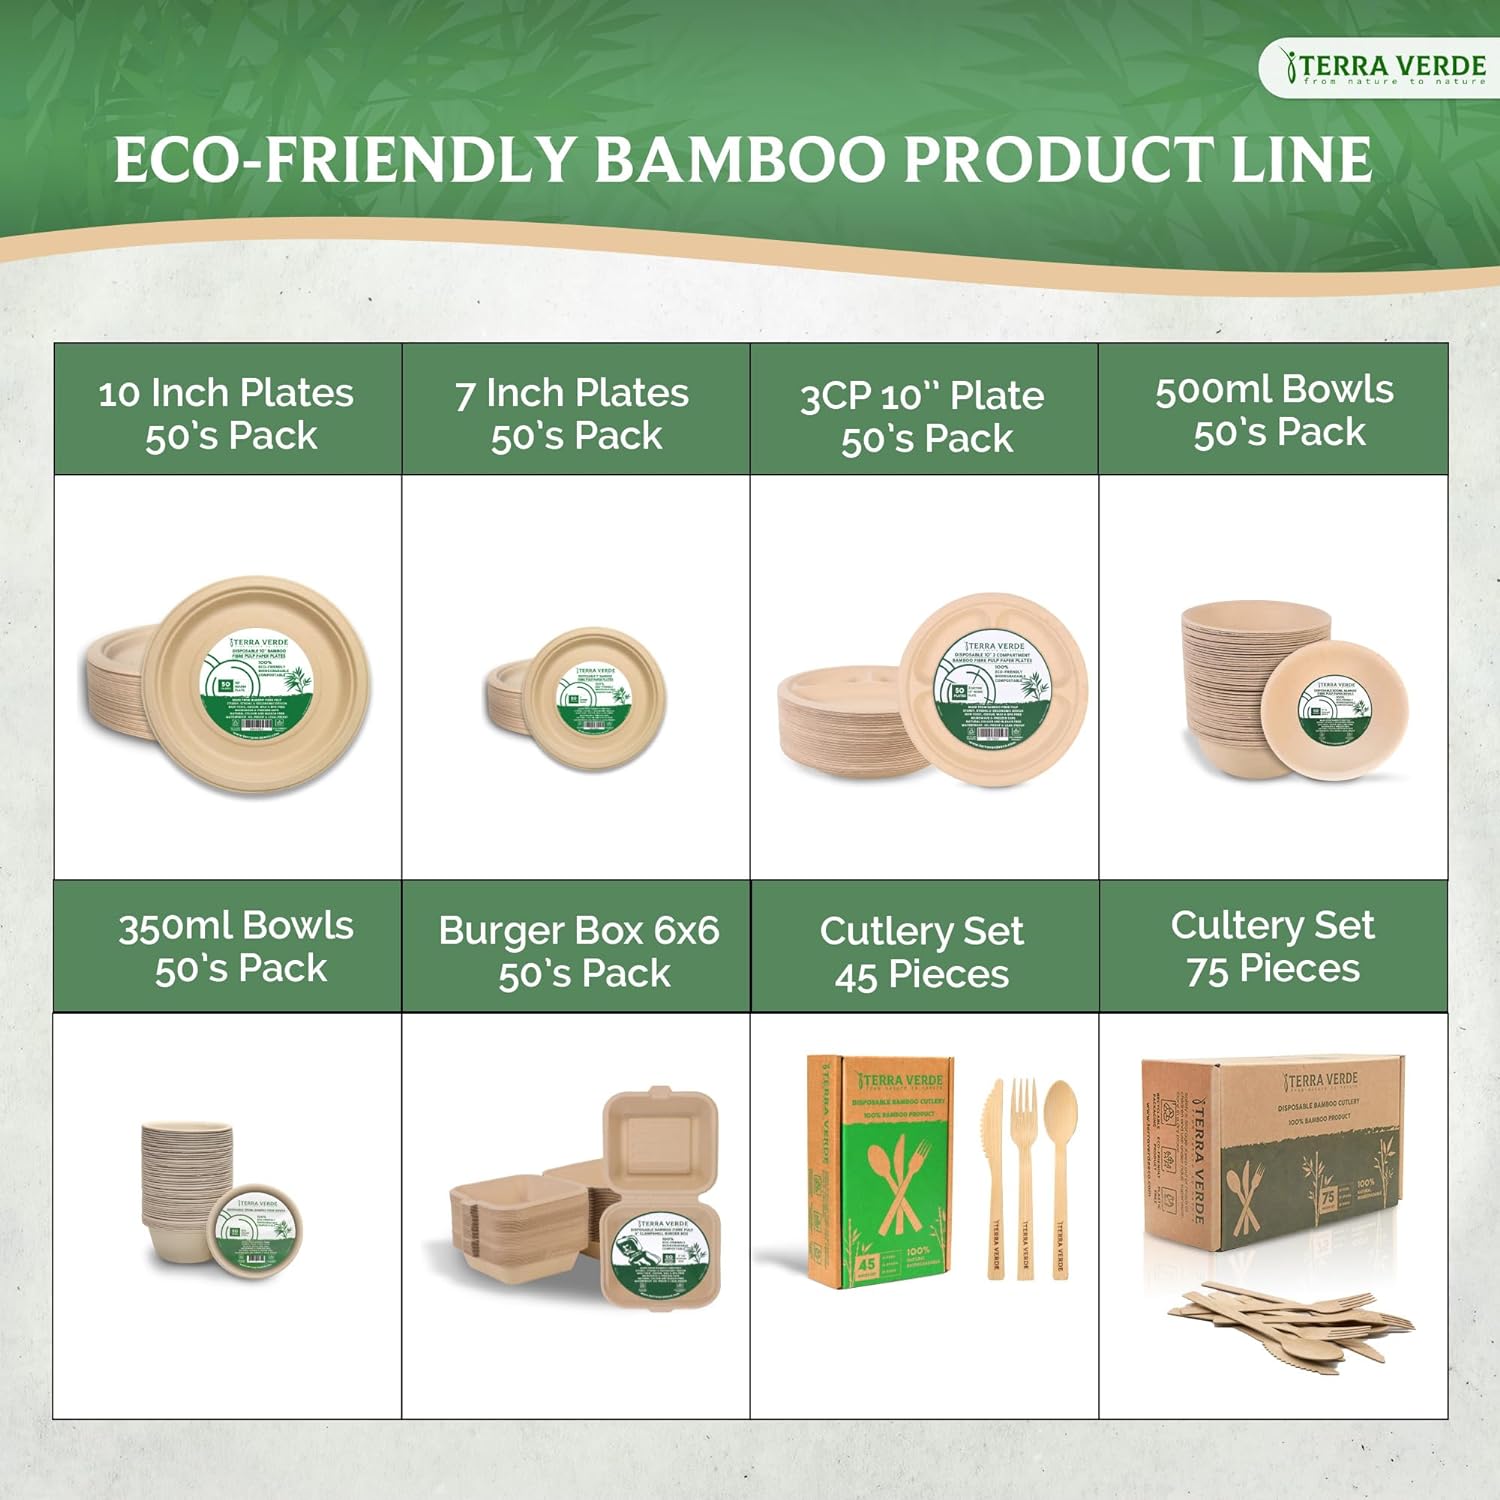 different types of eco friendly bamboo products by terra verde